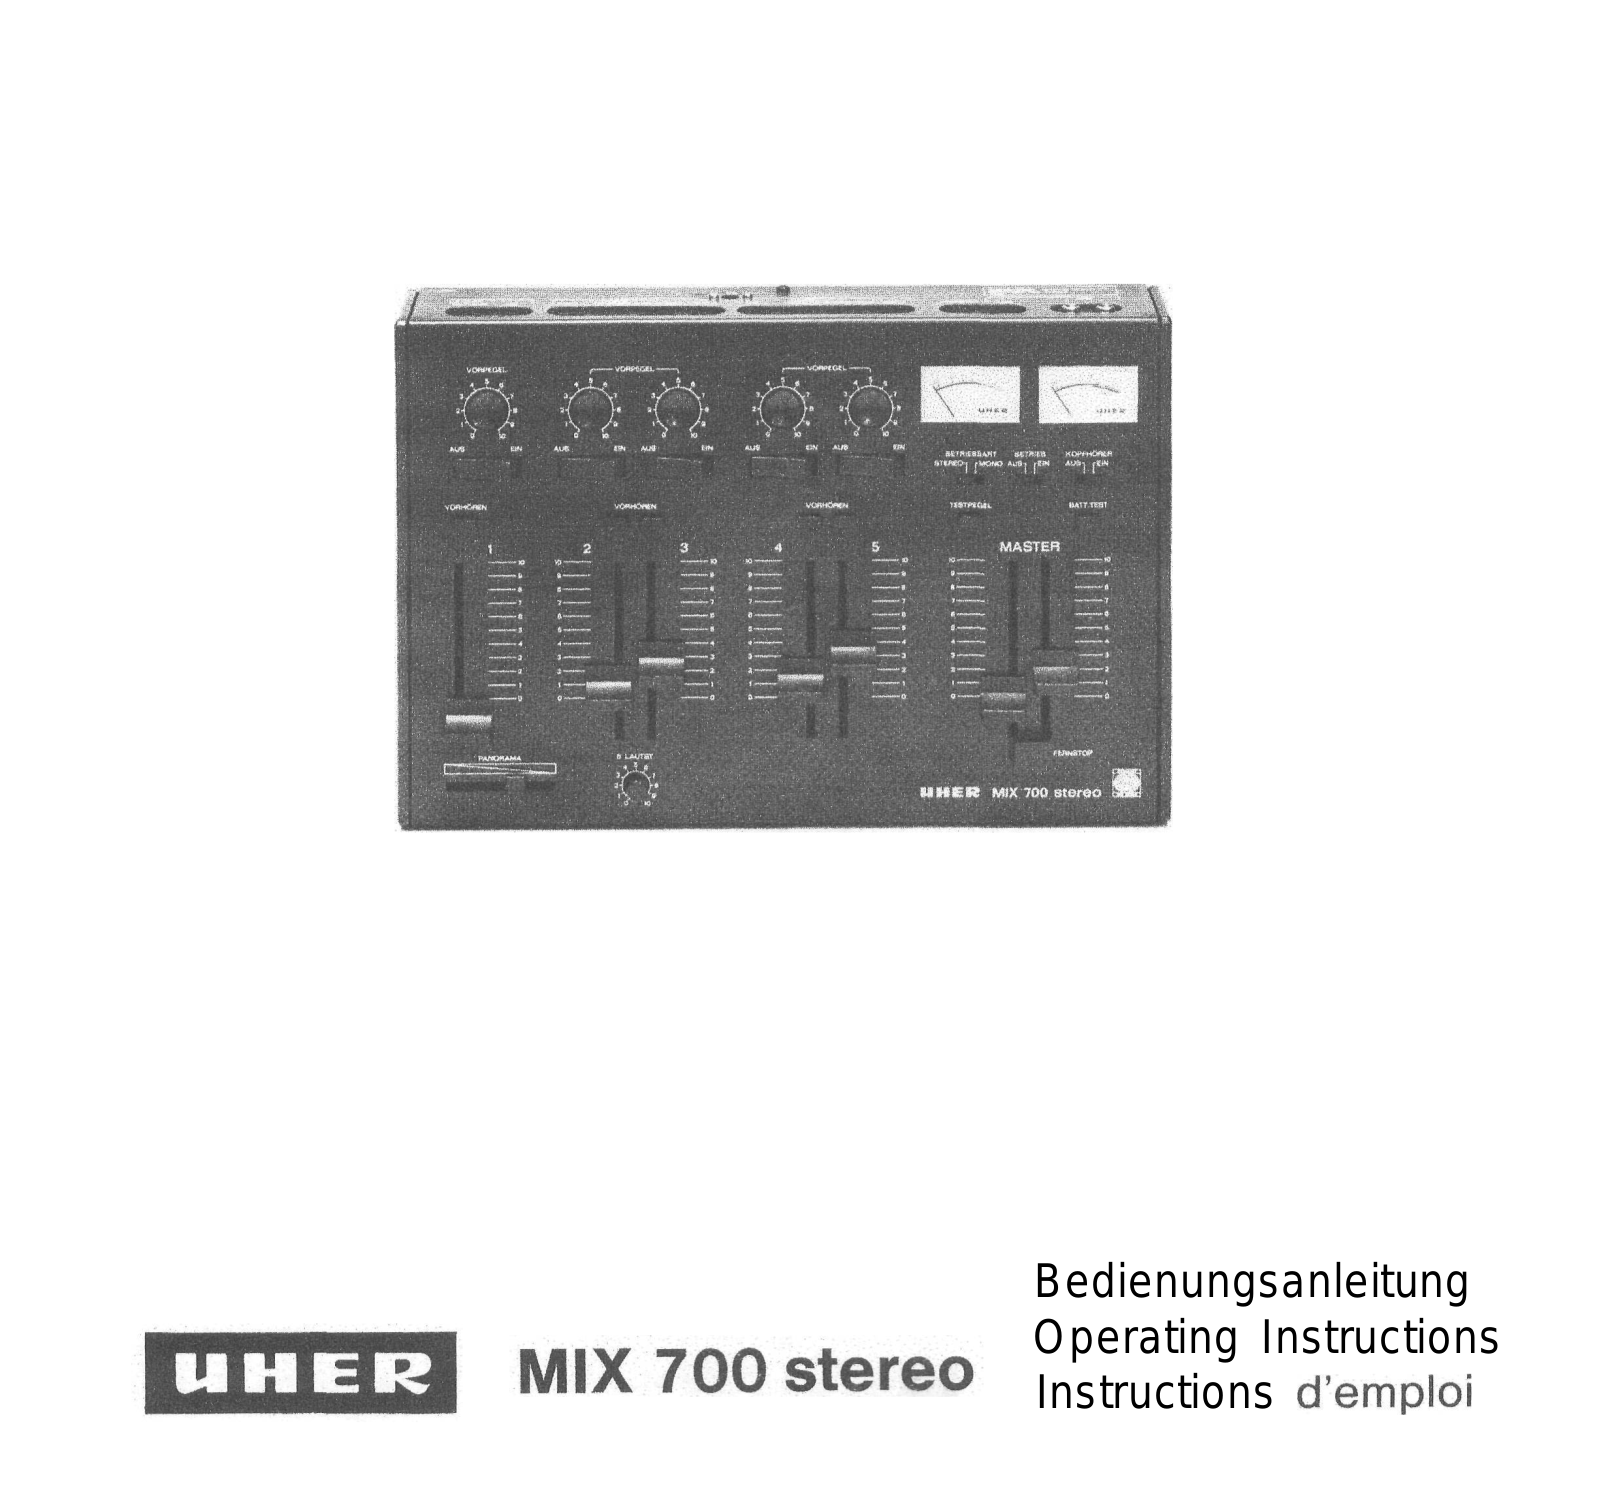 Uher Mix 700 stereo User Manual